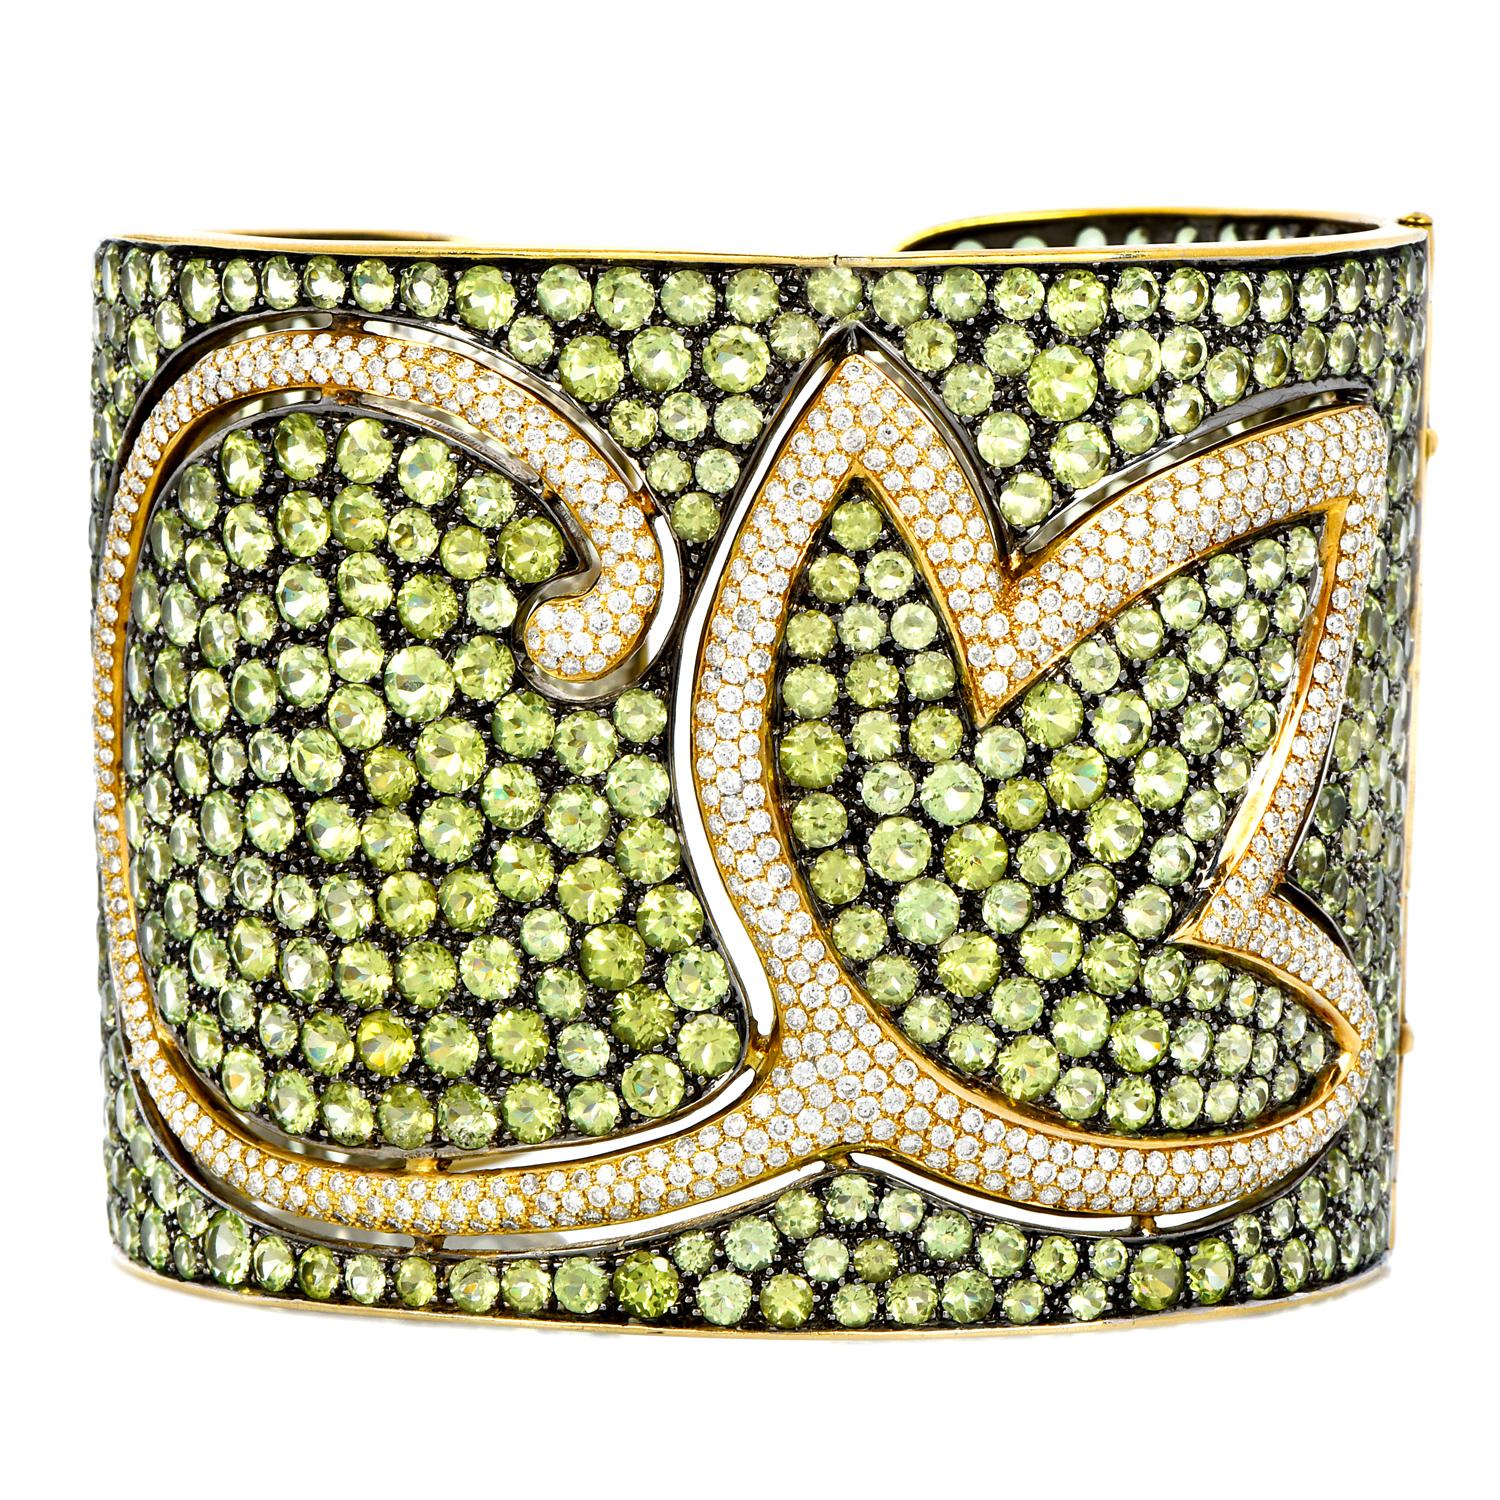 A finely made gold wide-cuff bangle bracelet, with timeless elegance, and a royalty-inspired look.

This wide cuff bracelet is crafted in solid 18K white and yellow gold. it is covered all around with genuine round cut peridot and very fine